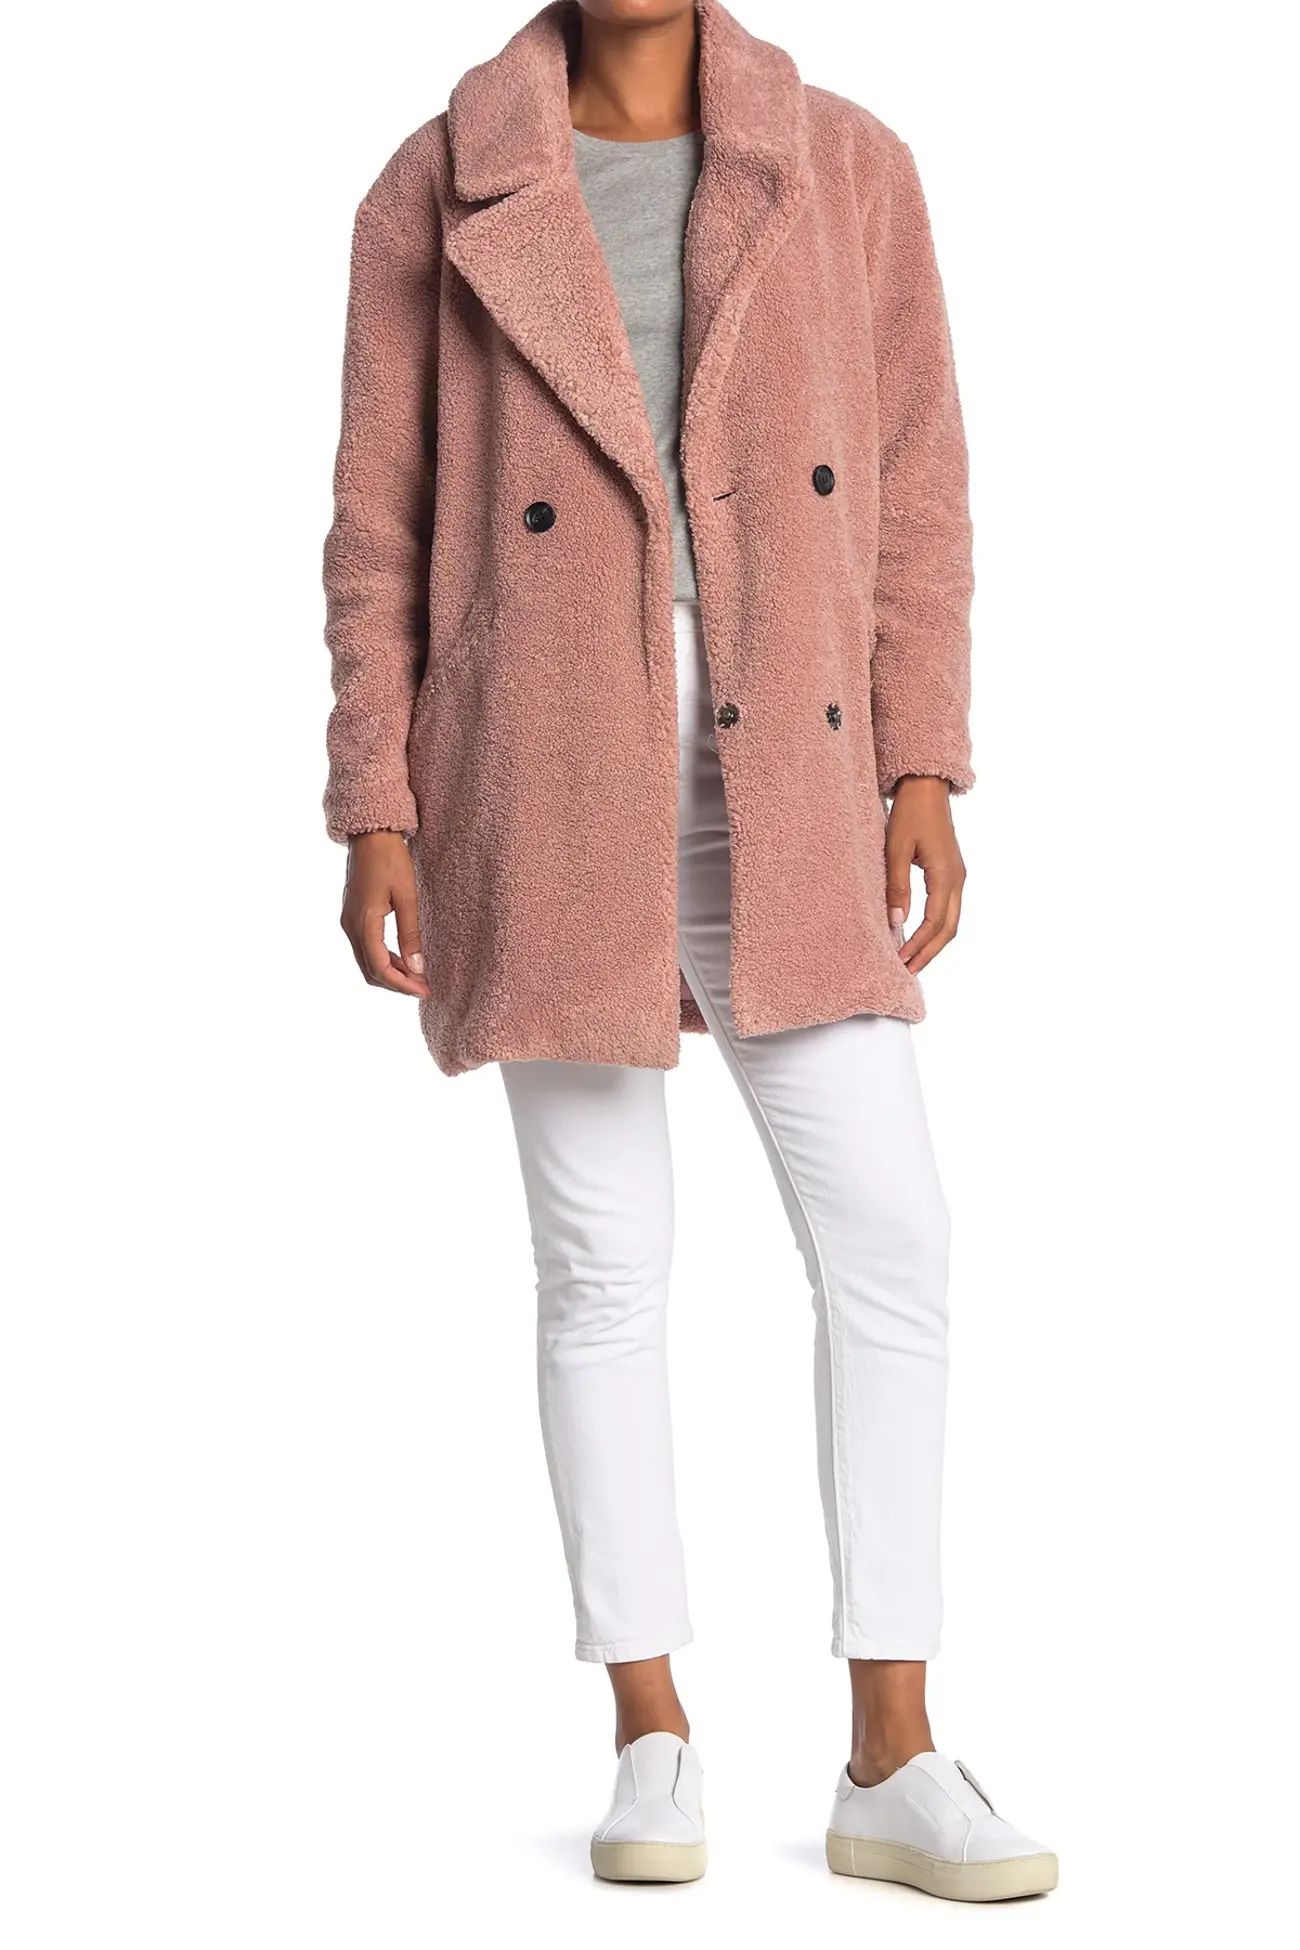 Lucky Brand | Double Breasted Faux Teddy Fur Coat | Nordstrom Rack | Nordstrom Rack